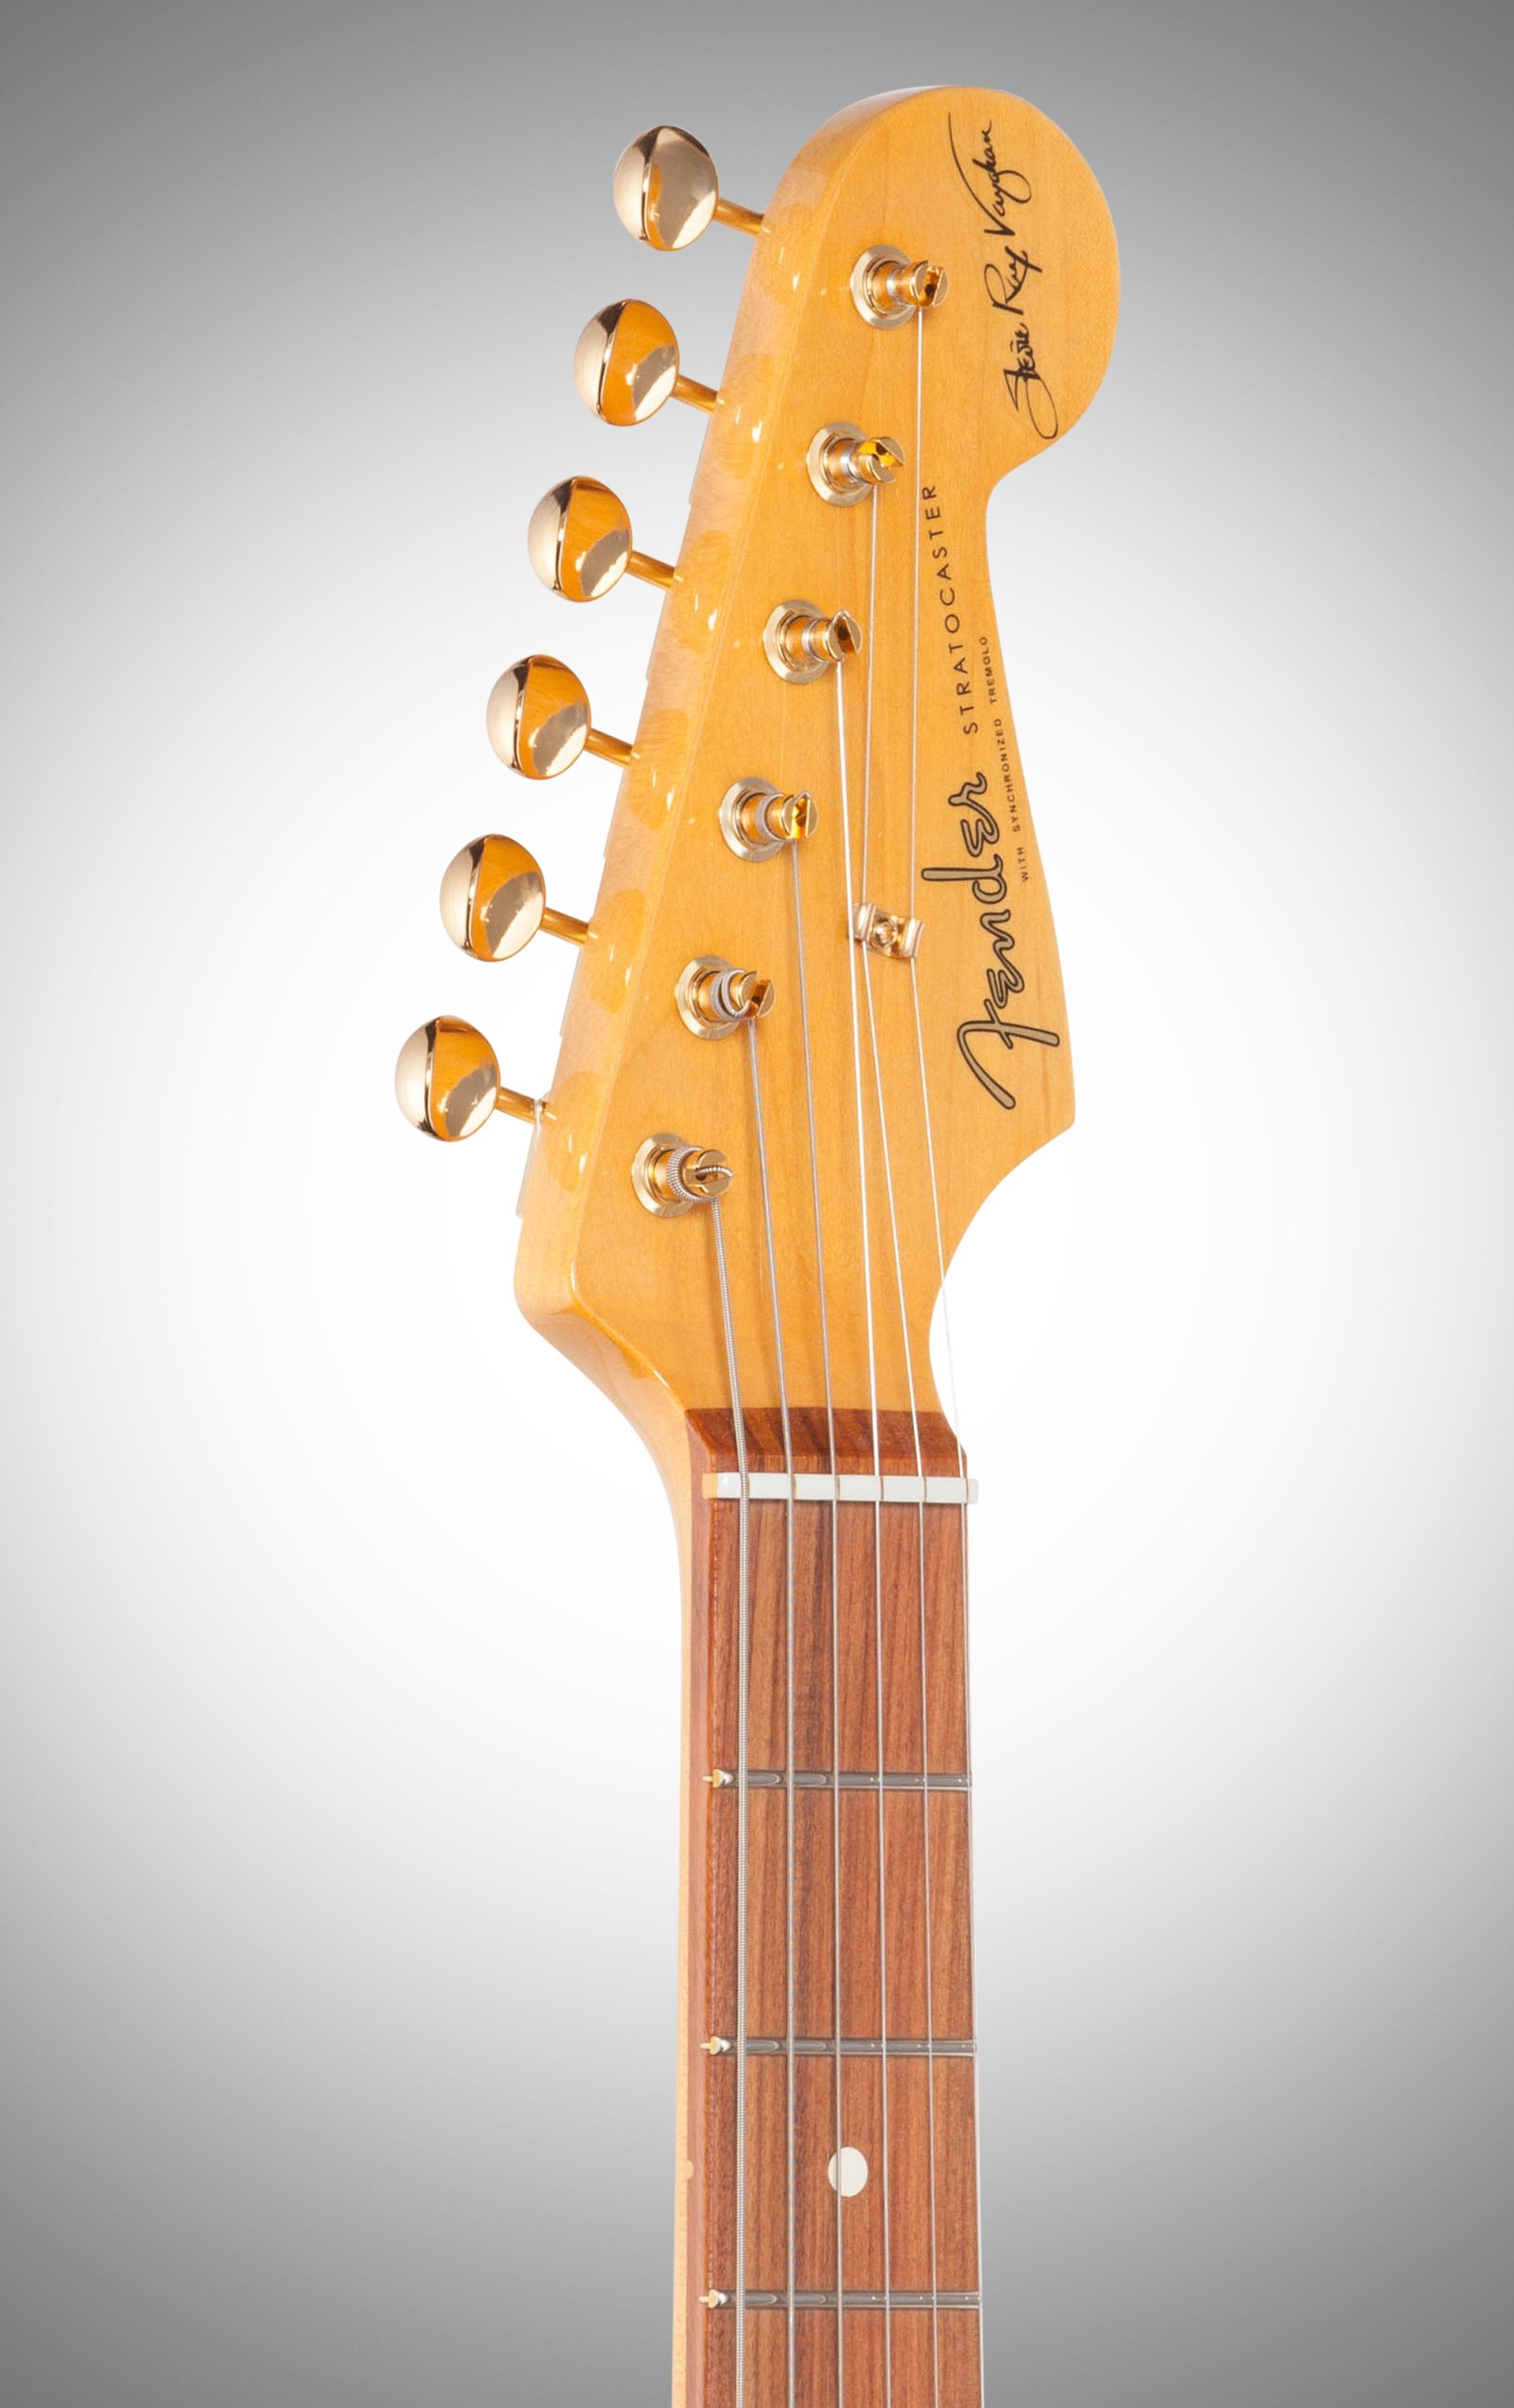 Fender Stevie Ray Vaughan Stratocaster (Pao Ferro with ... yamaha b guitar wiring diagram 